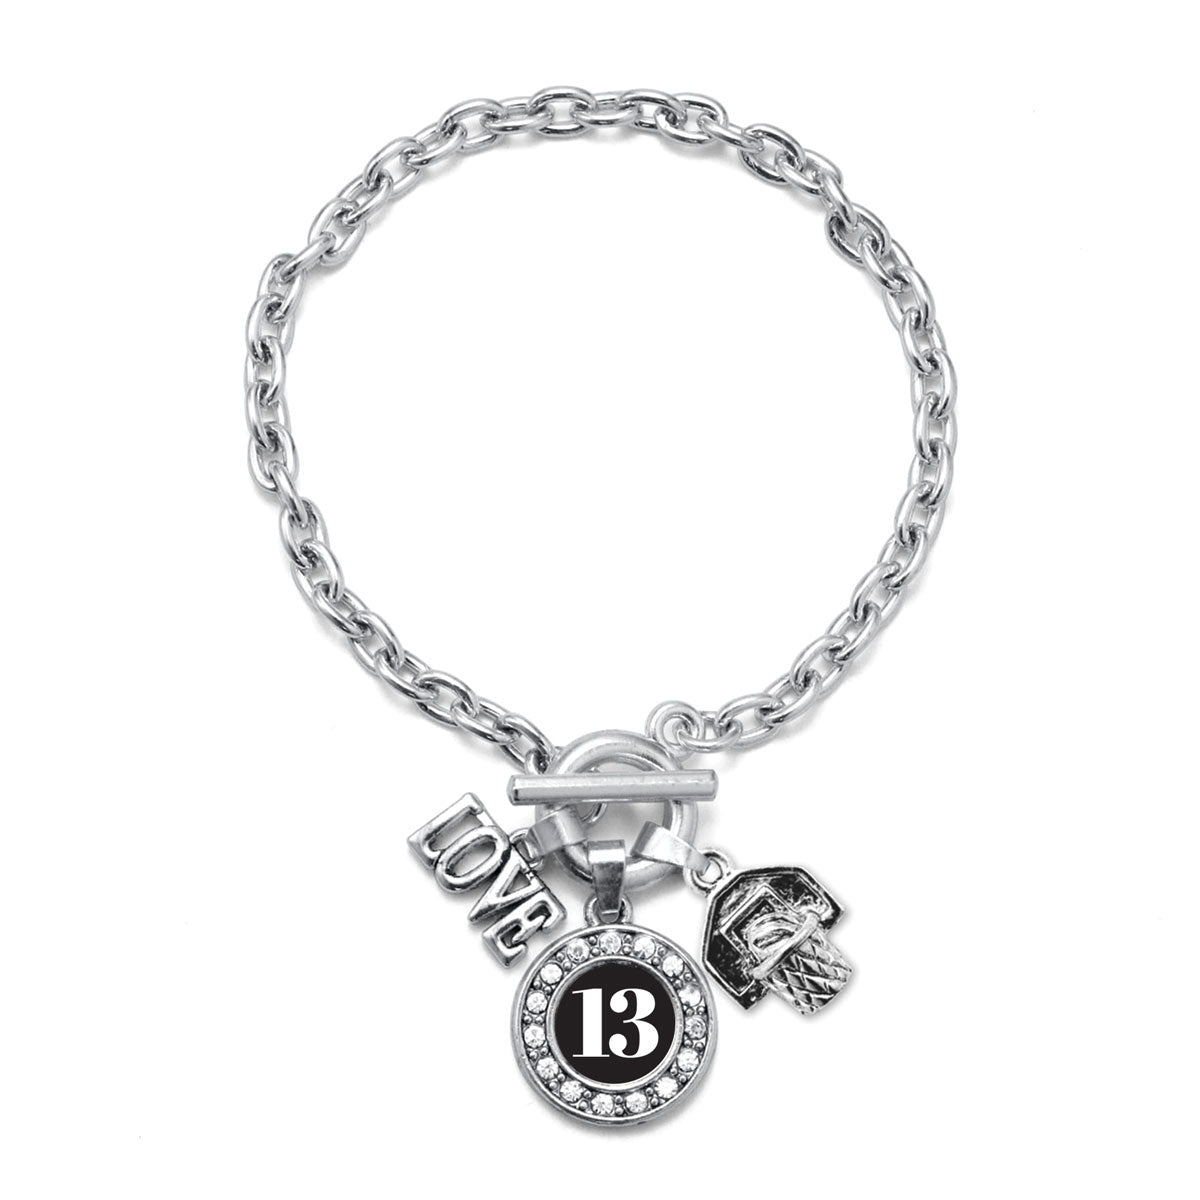 Silver Basketball Hoop - Sports Number 13 Circle Charm Toggle Bracelet